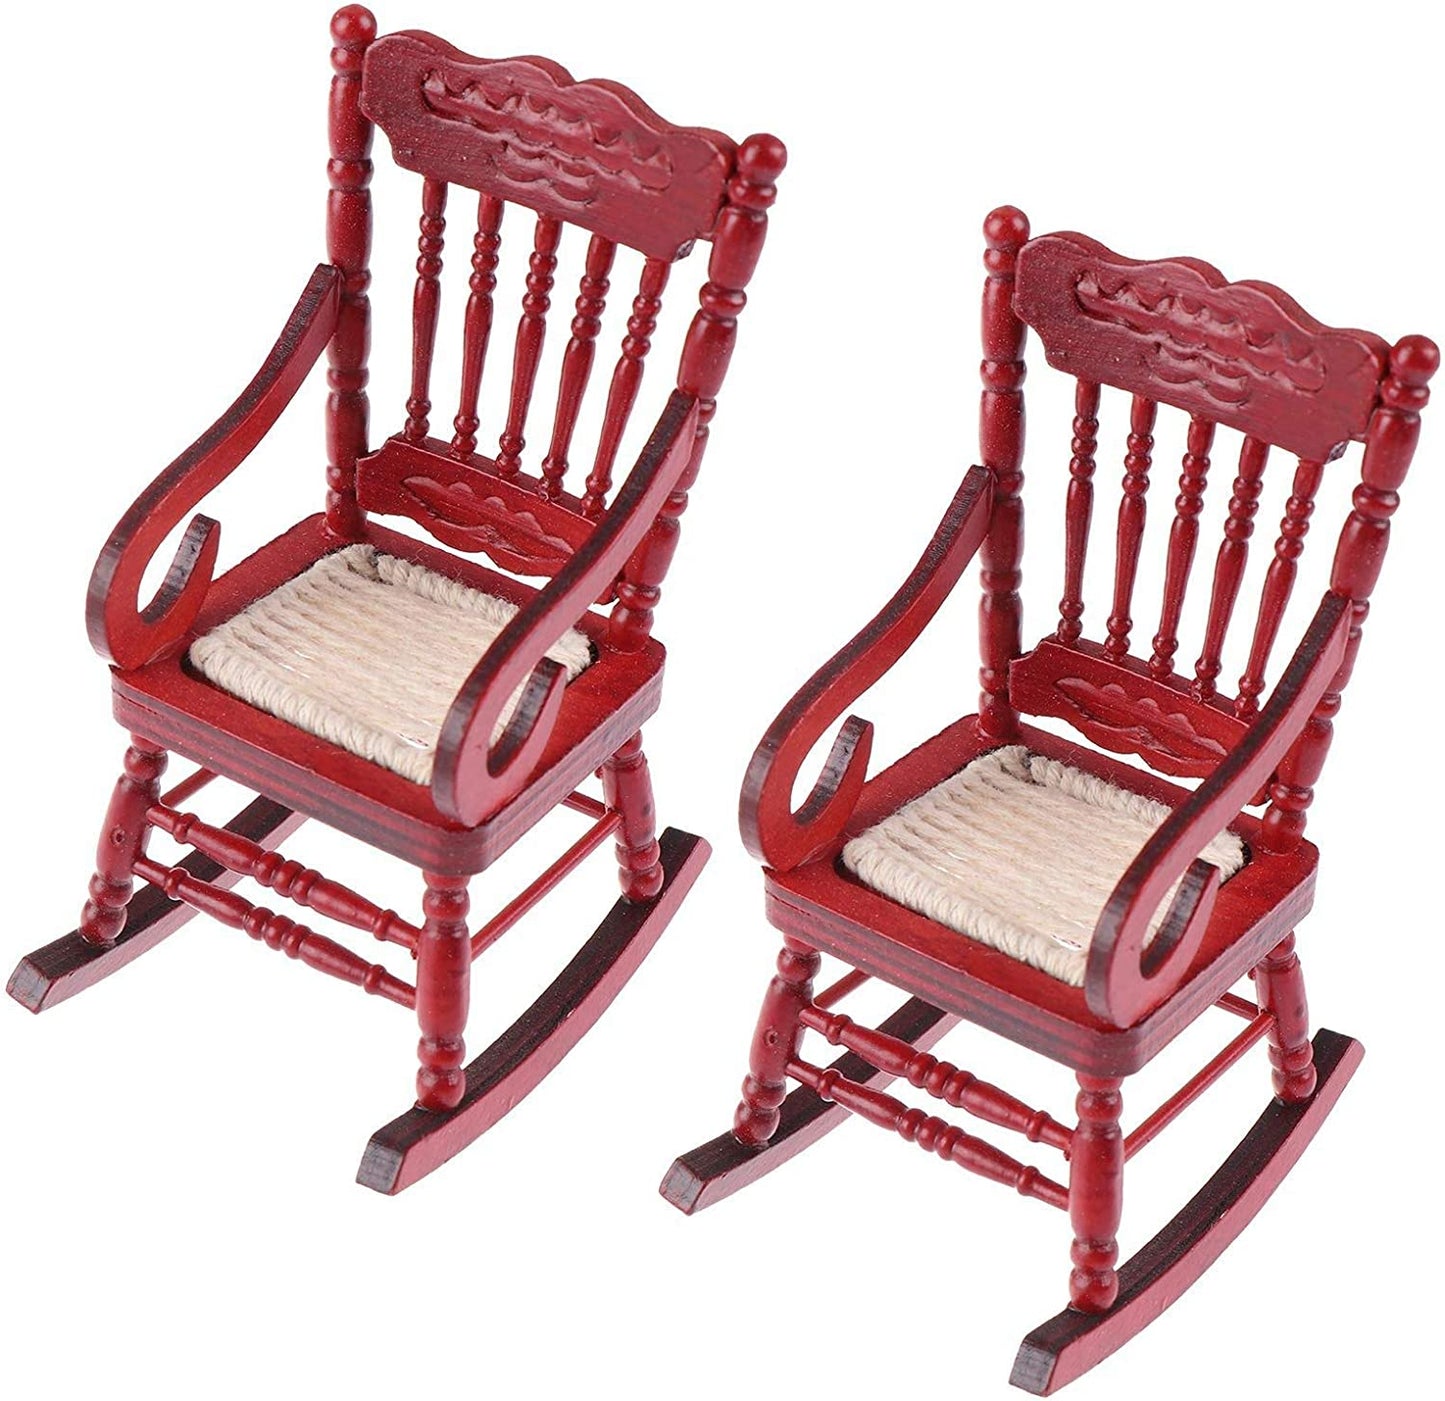 Jiaminye 2 Pcs 1:12 Dollhouse Miniature Furniture Wooden Rocking Chairs Dollhouse Accessories for Doll House Decoration,Red